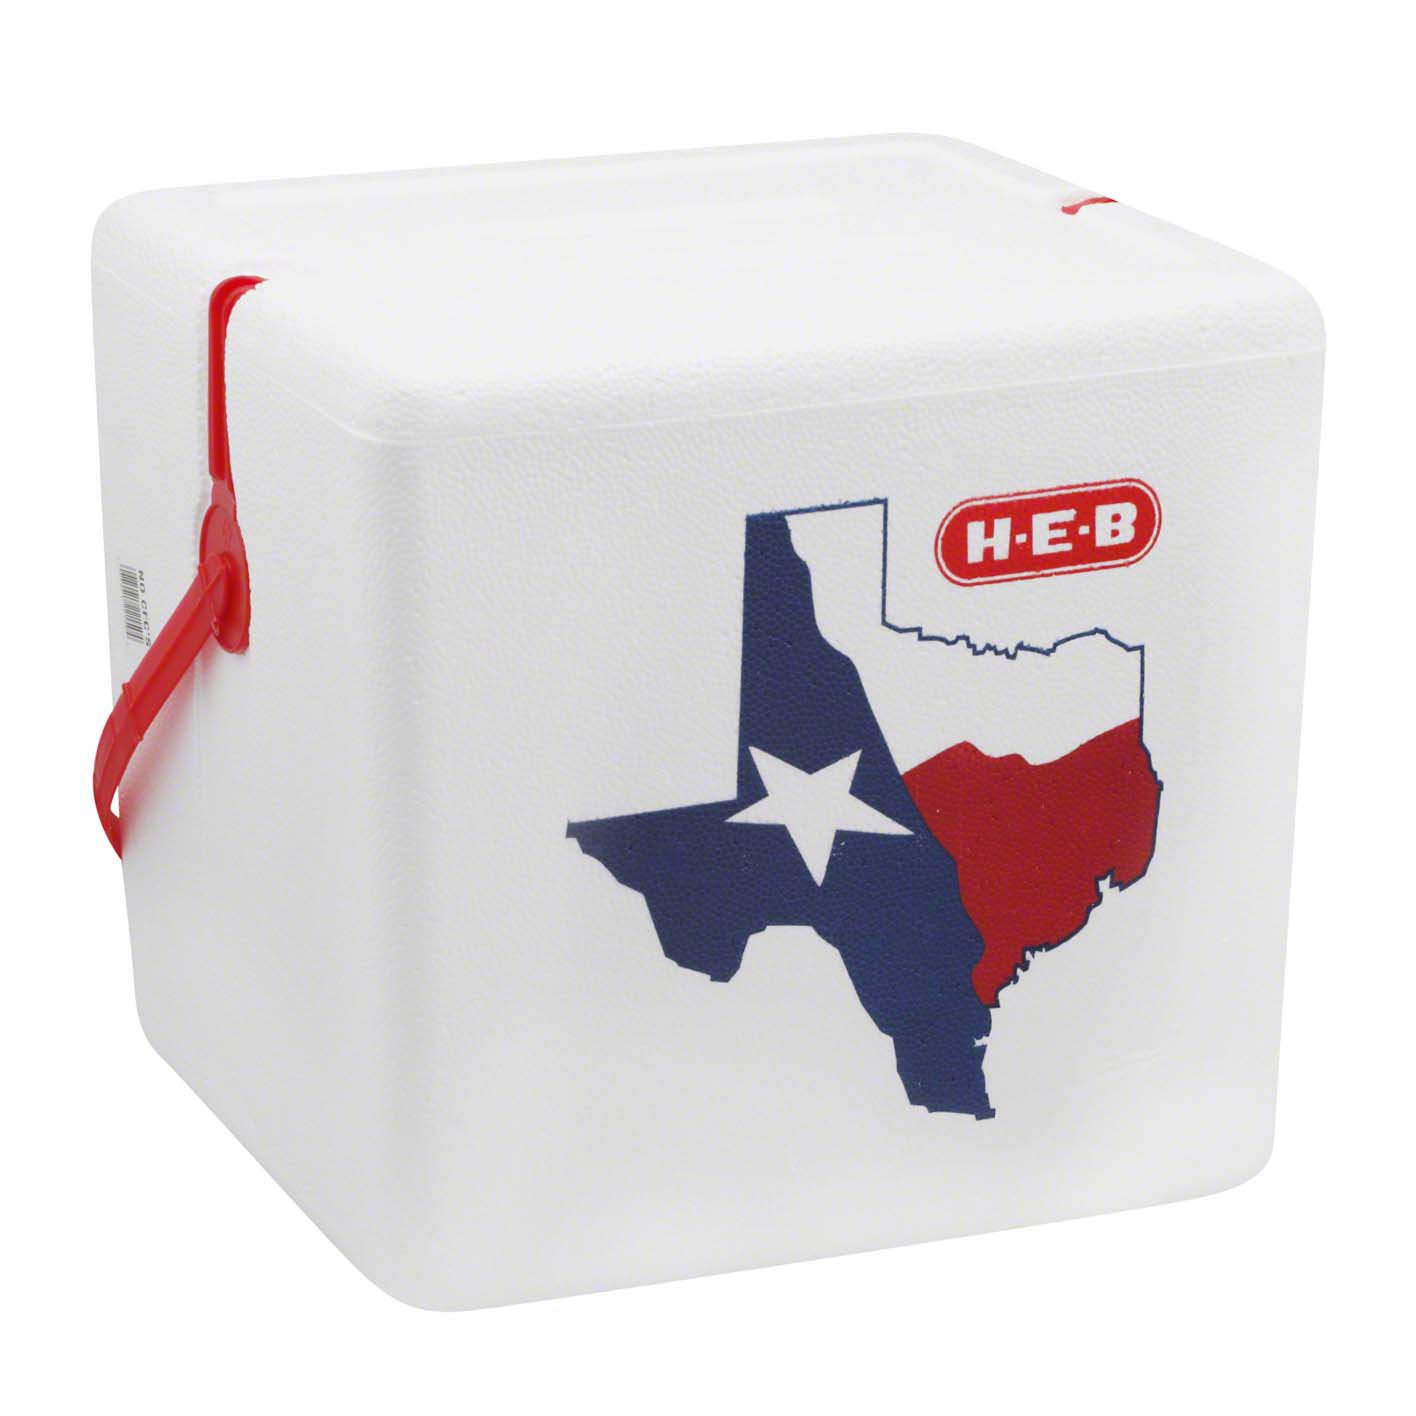 Texas Coolers